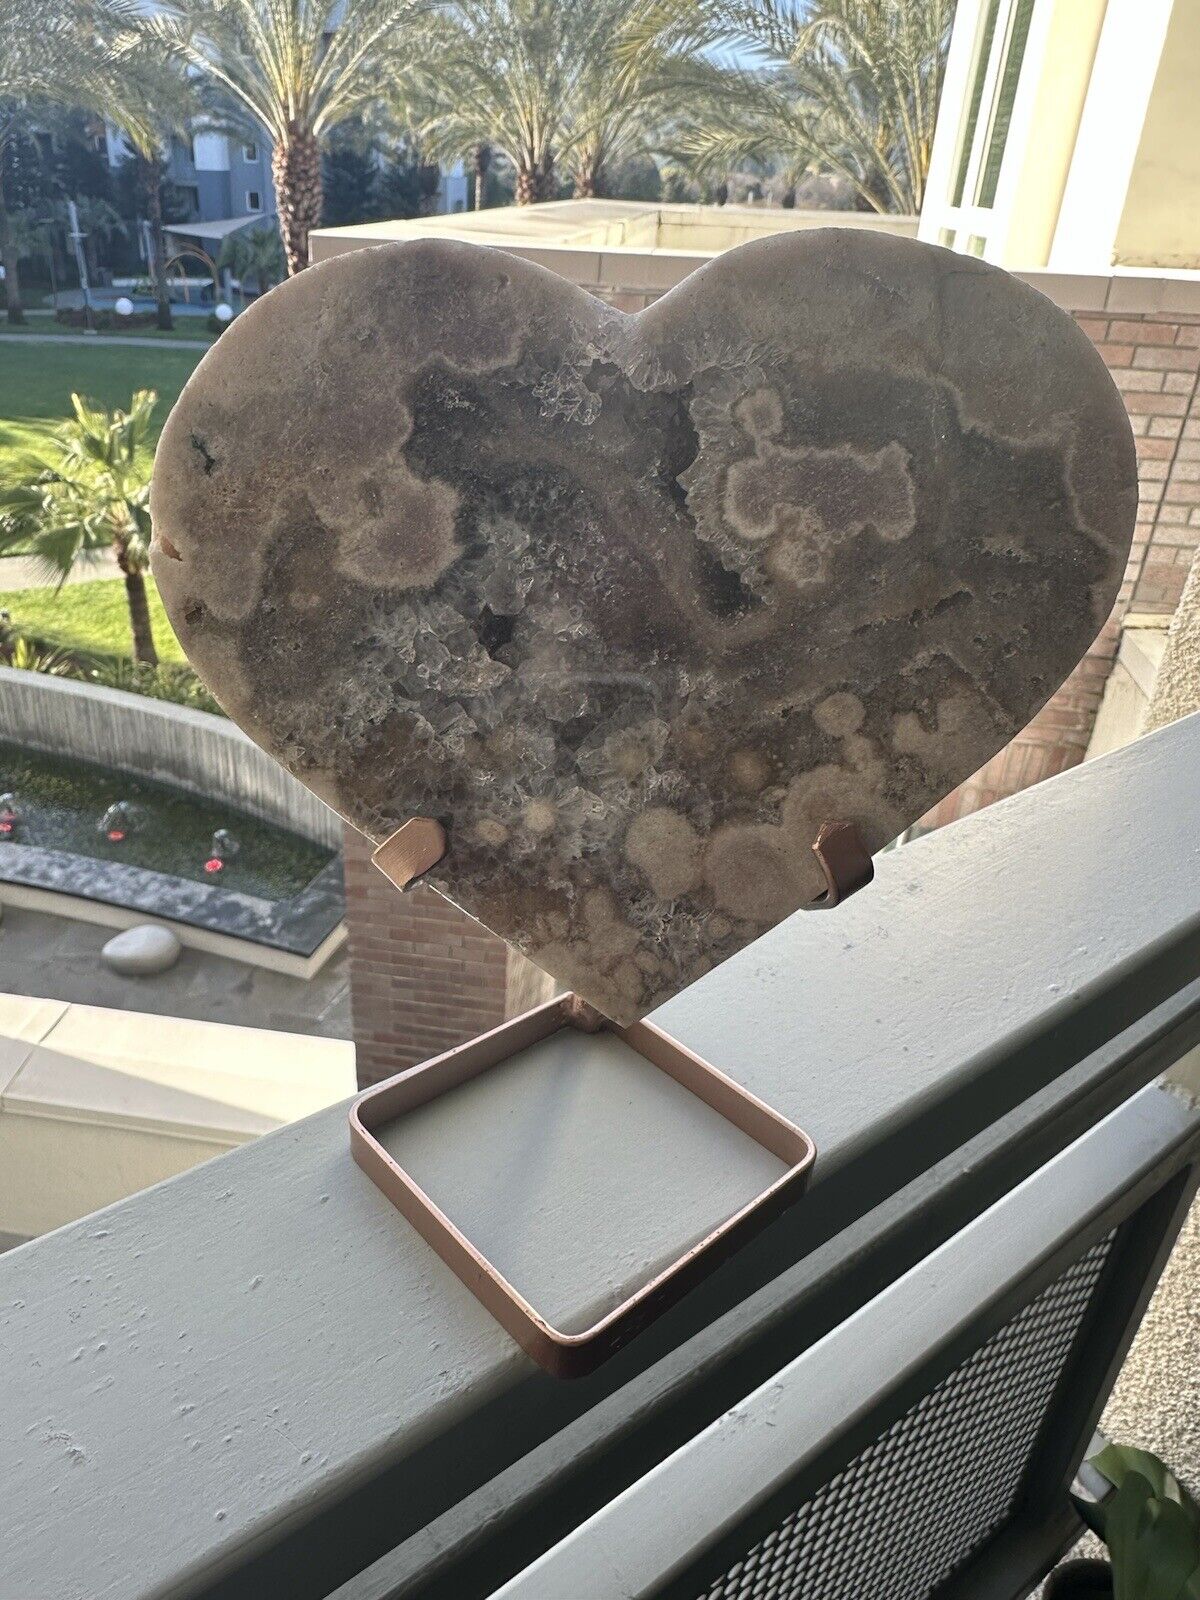 Pink Amethyst Heart On Stand